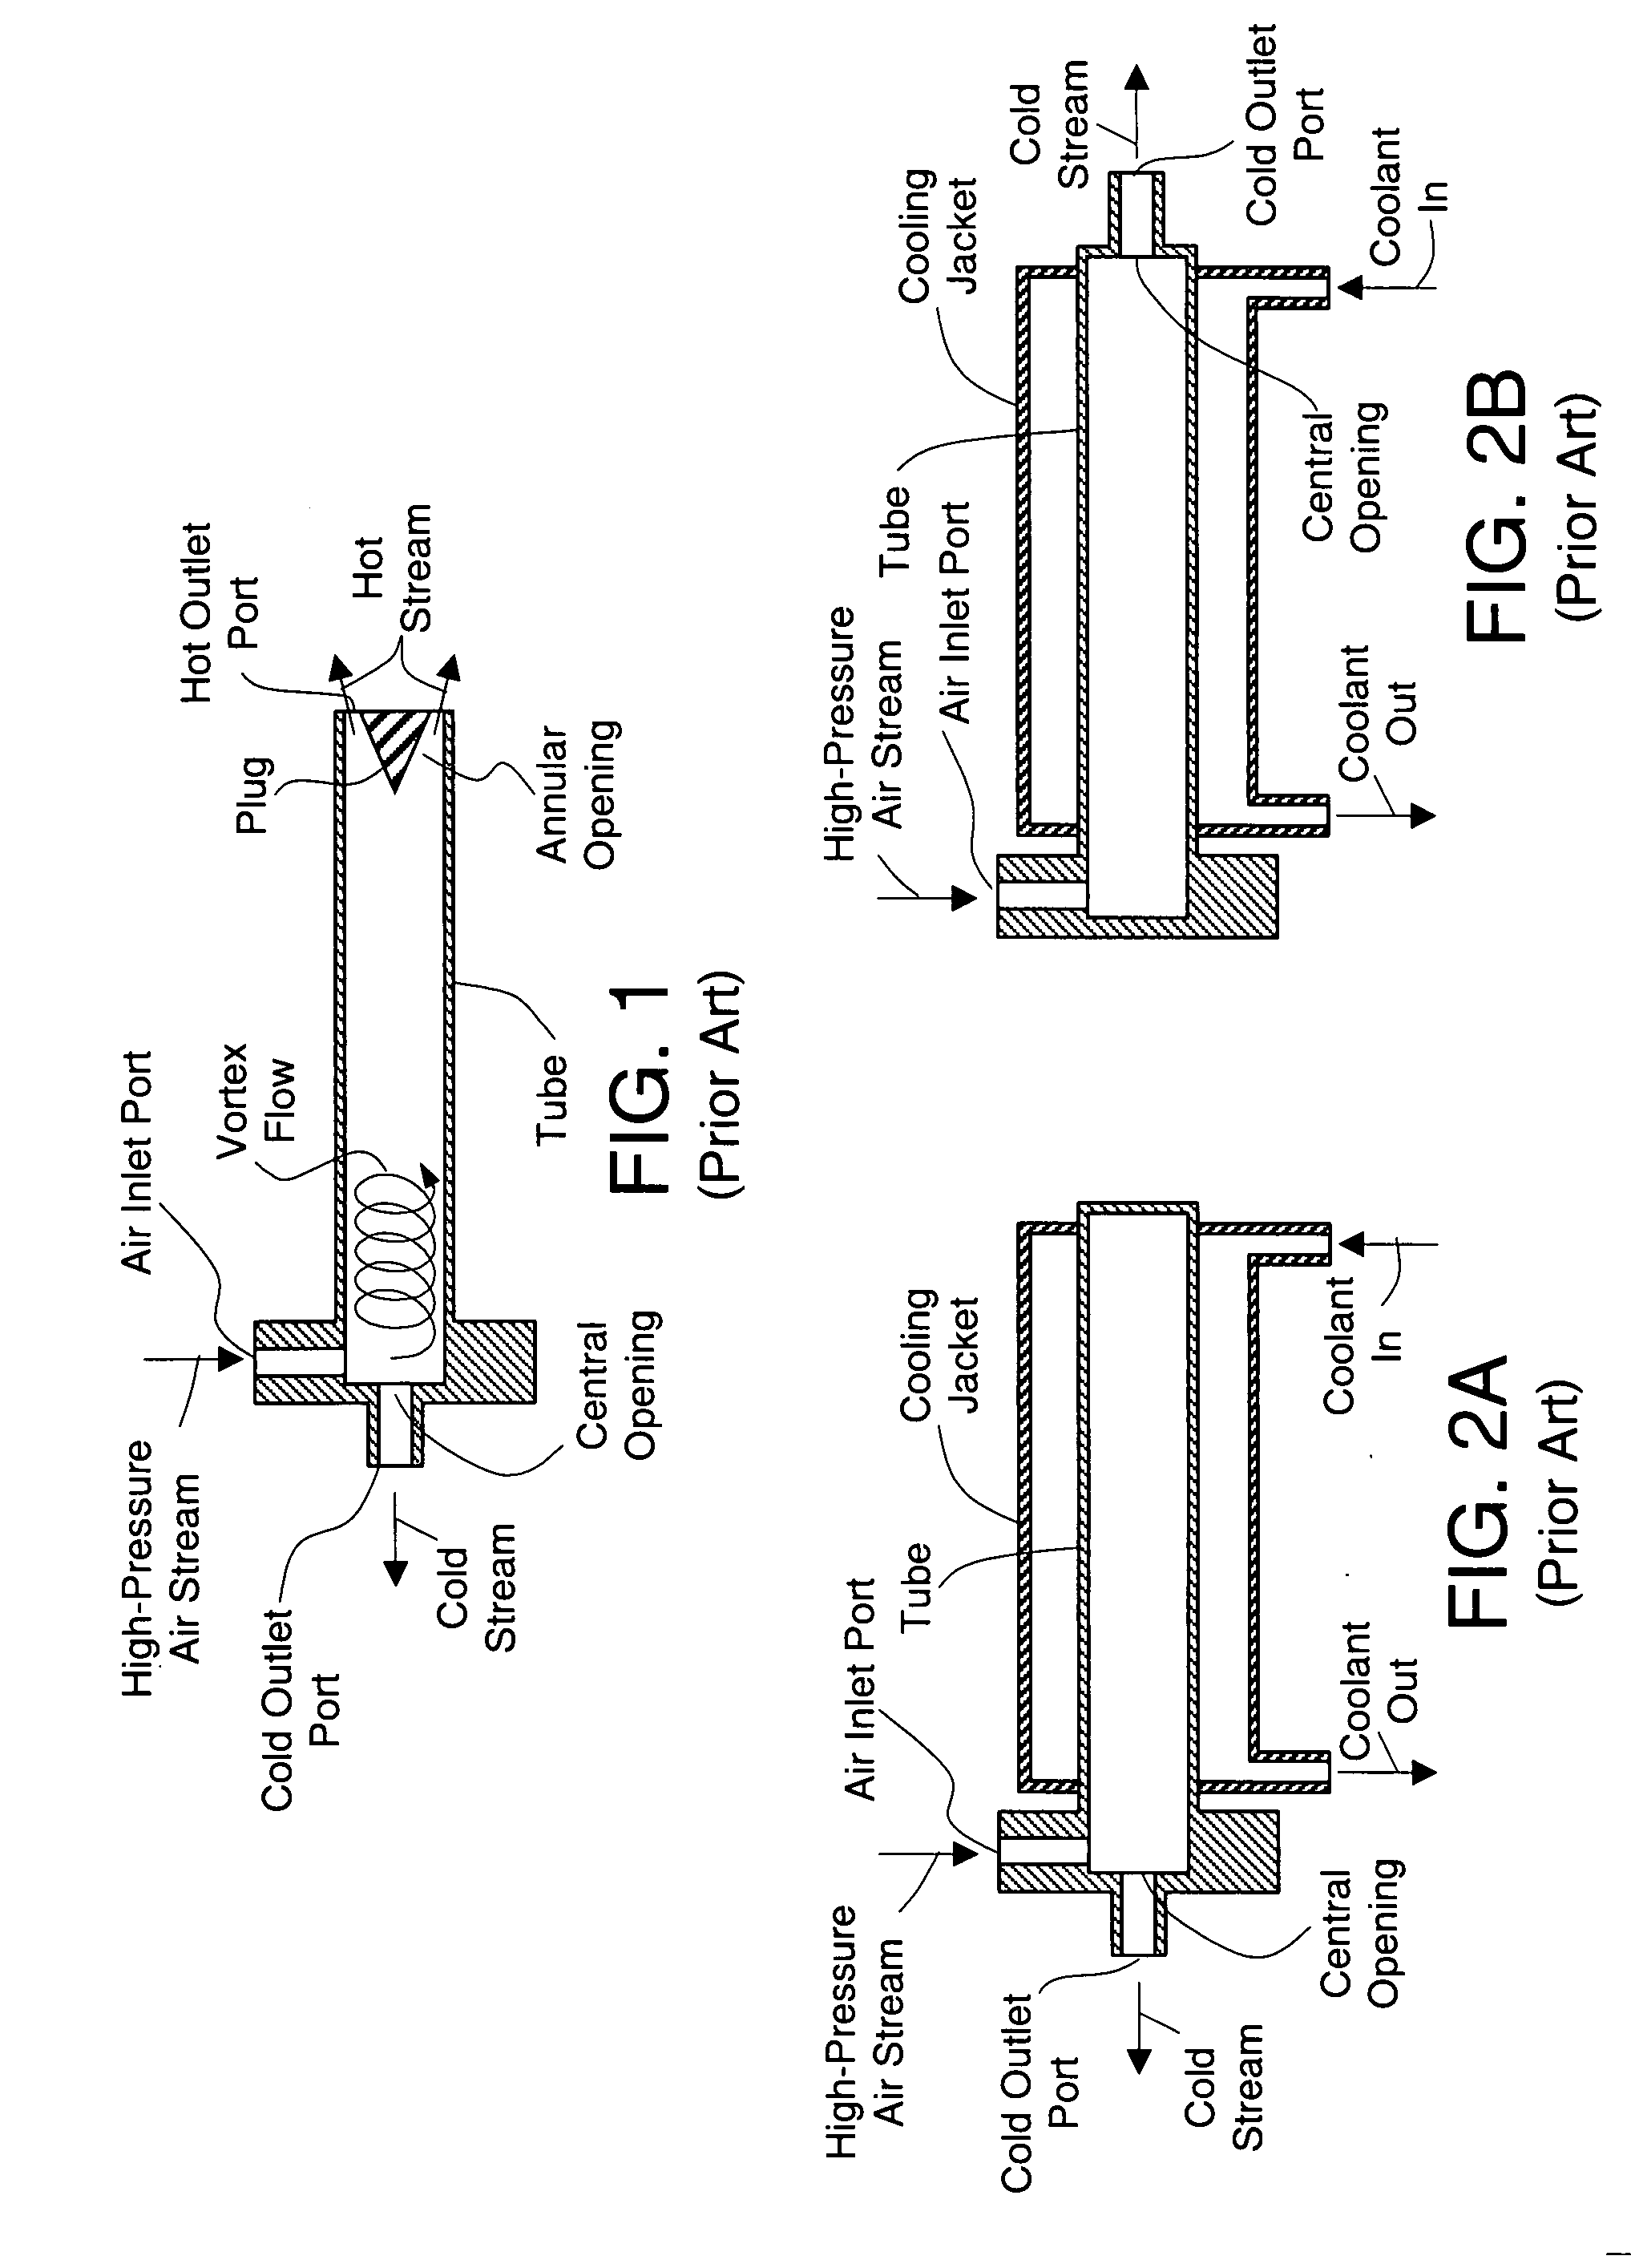 Internal combustion engine/water source system